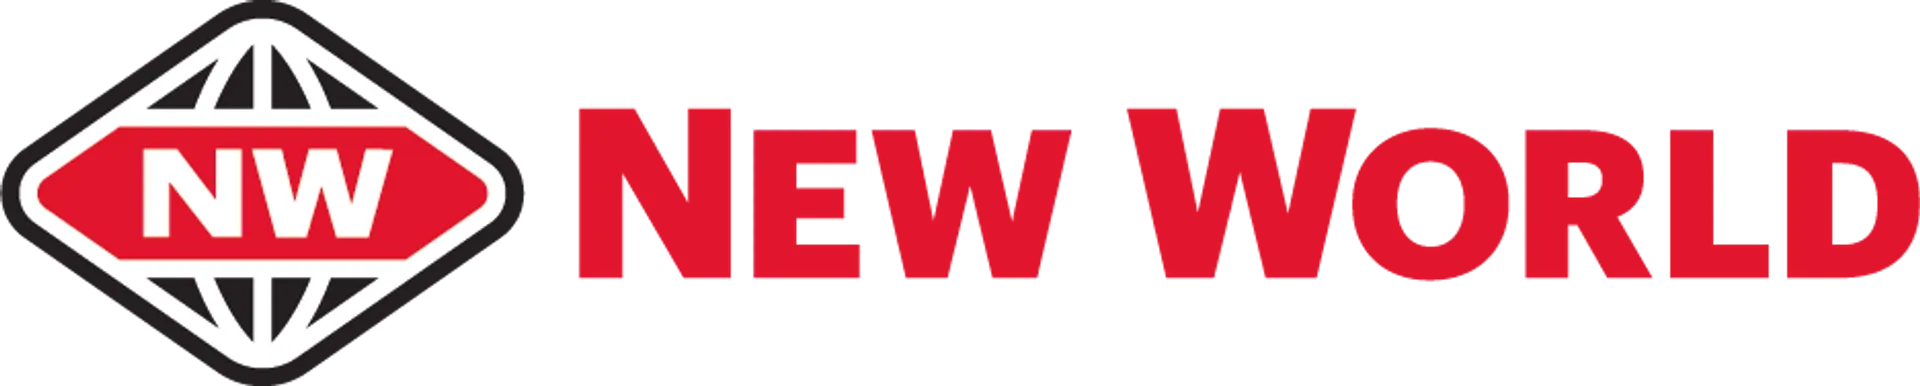 NEW WORLD logo current weekly ad